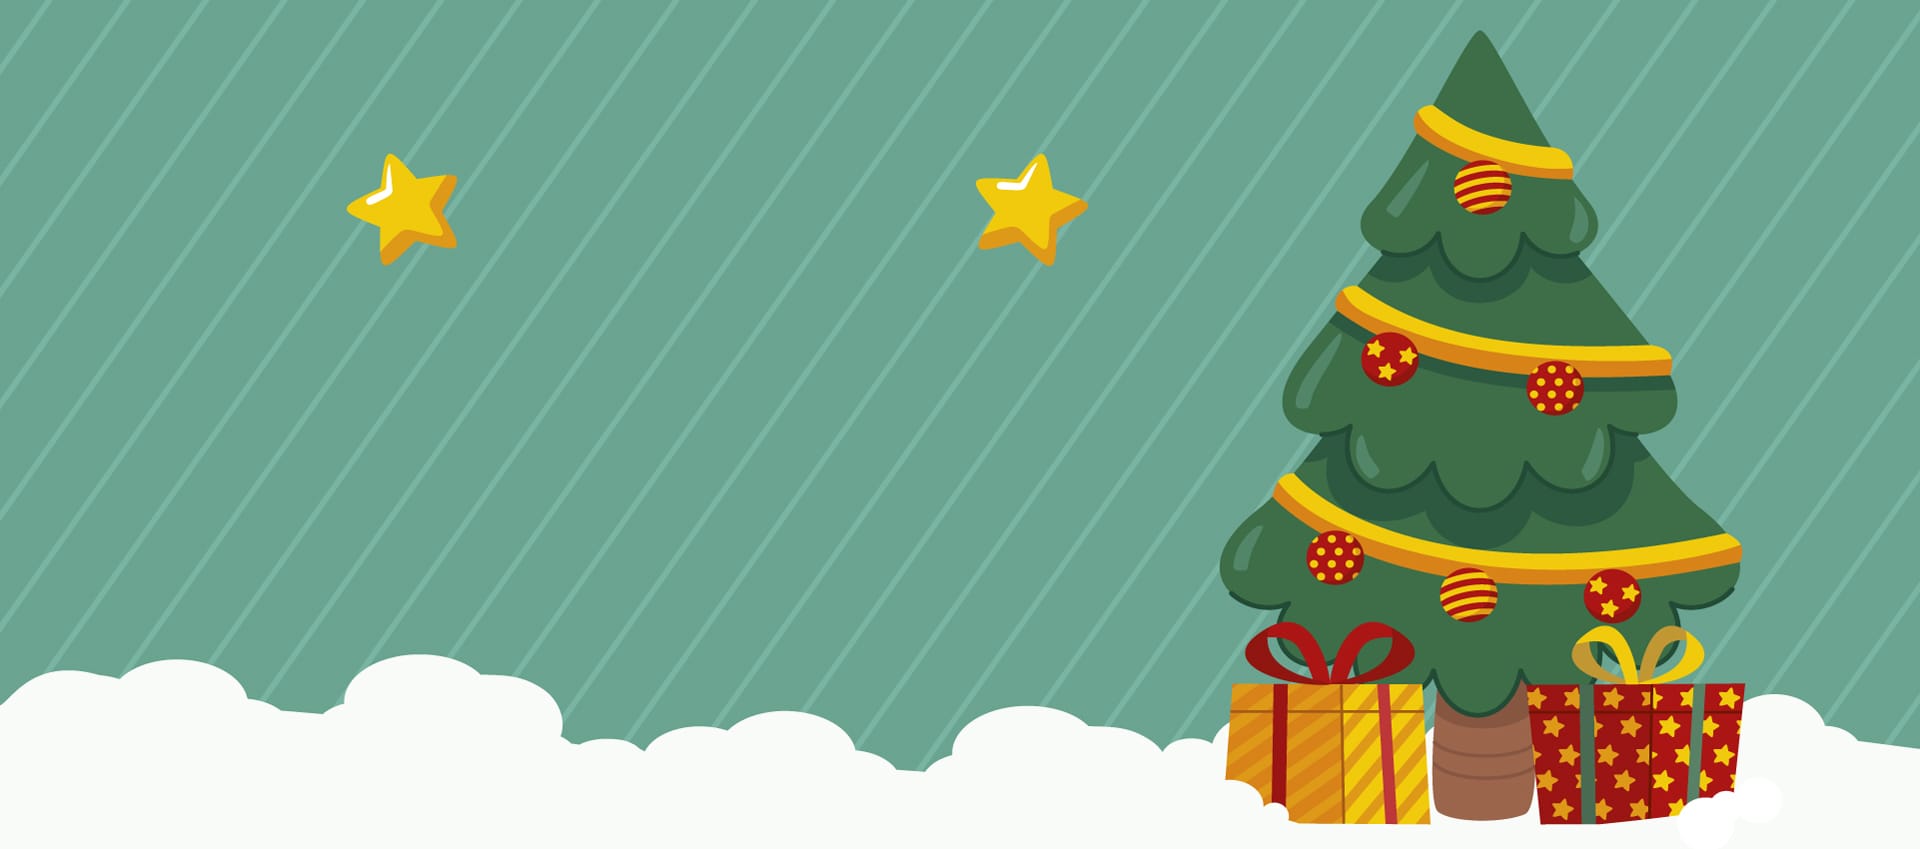 Flat business christmas banner template image